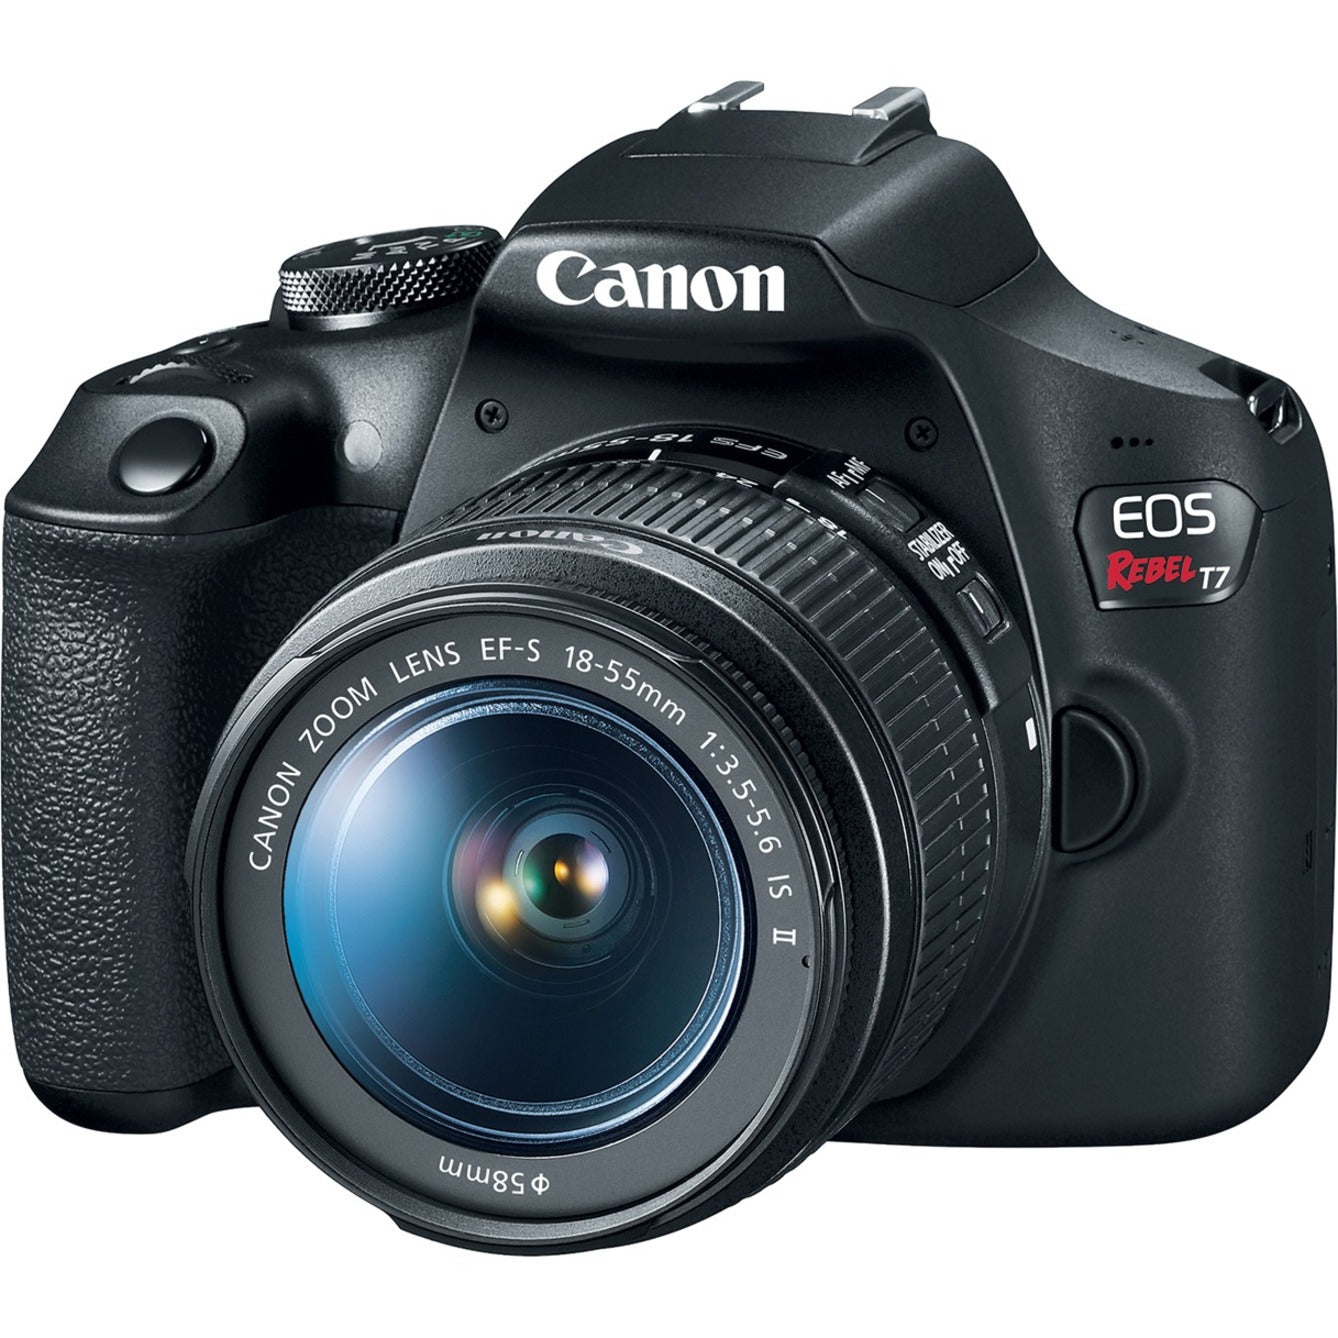 Canon 2727C002 EOS Rebel T7 Digital SLR Camera with Lens, 24.1 Megapixel, 3 LCD, 1920 x 1080 Video